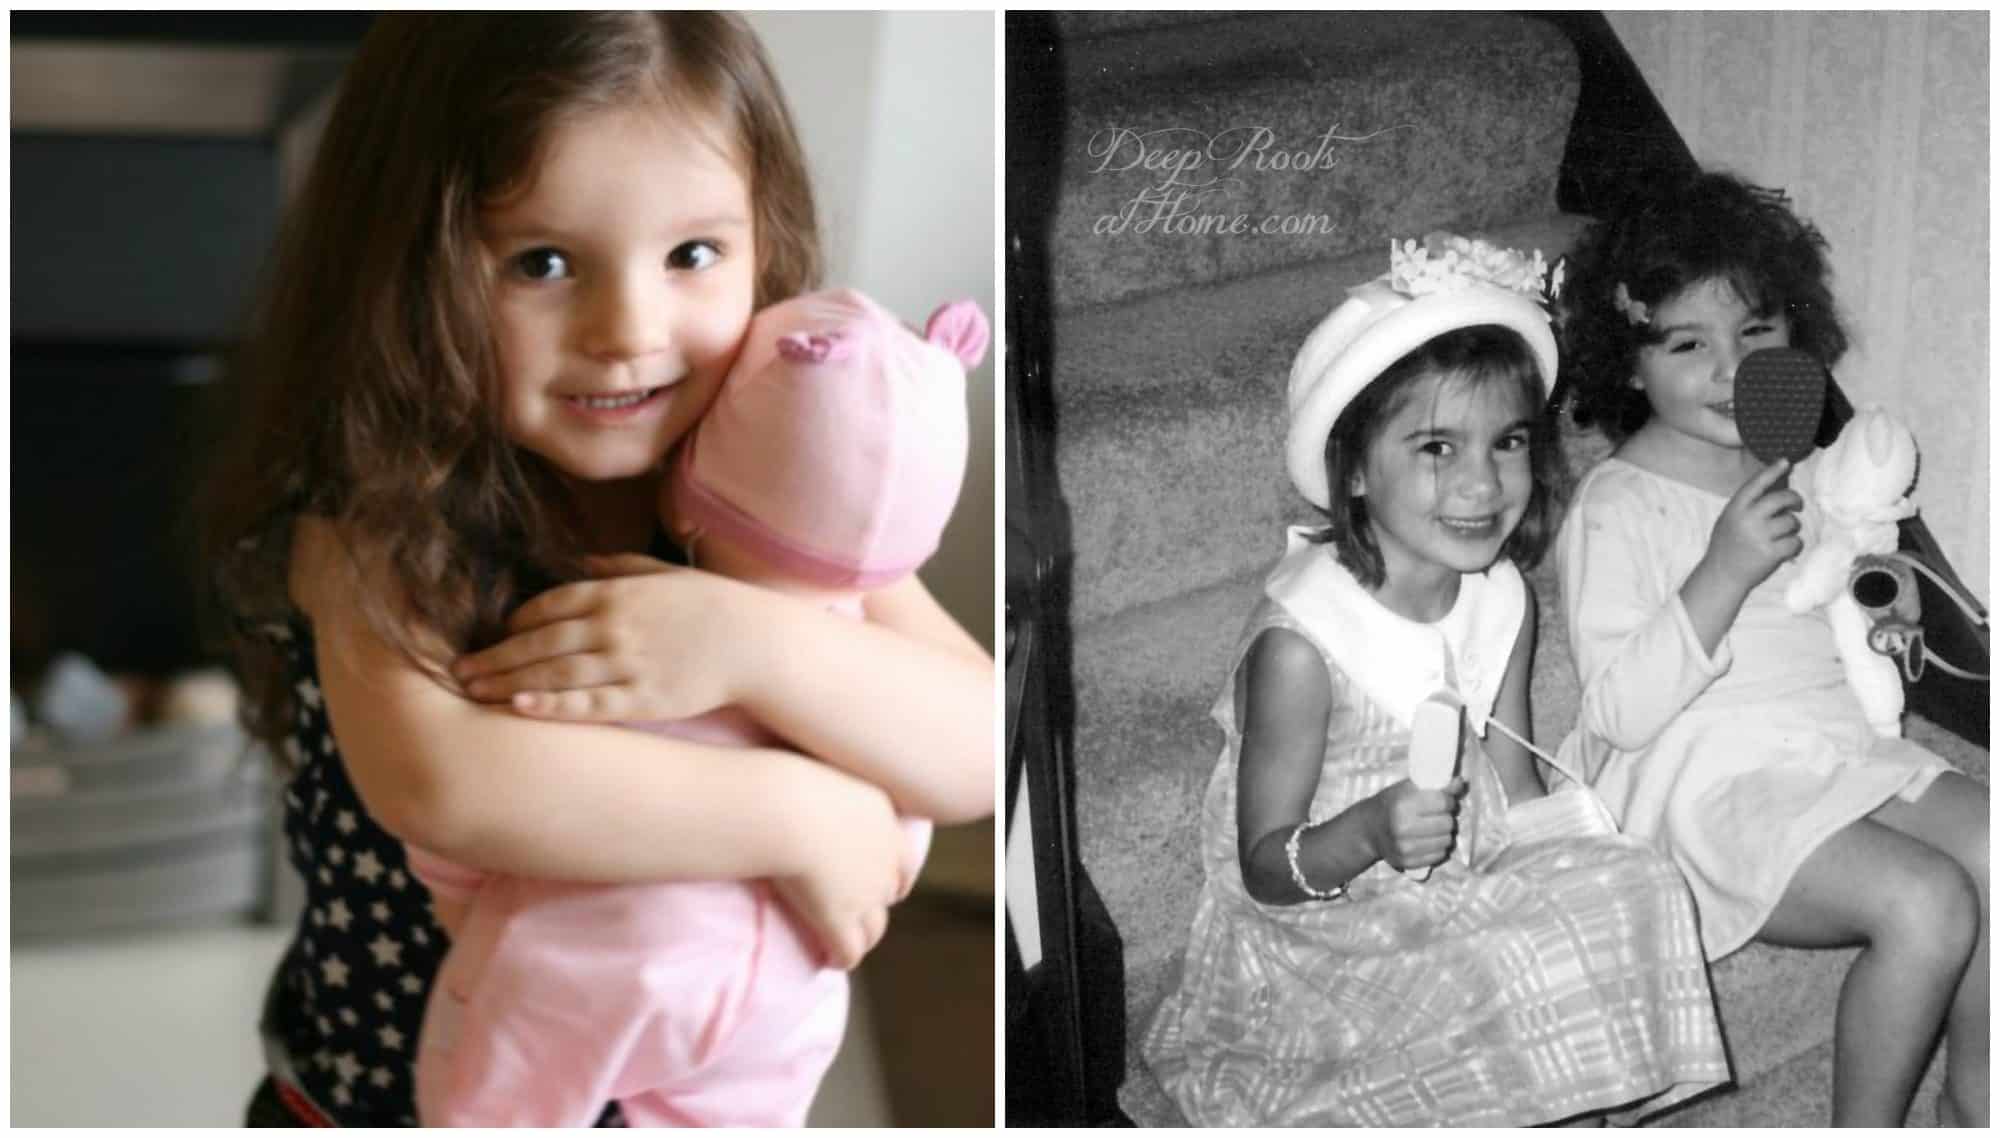 A little girl with baby doll and Two 6 year old girls playing dress-up